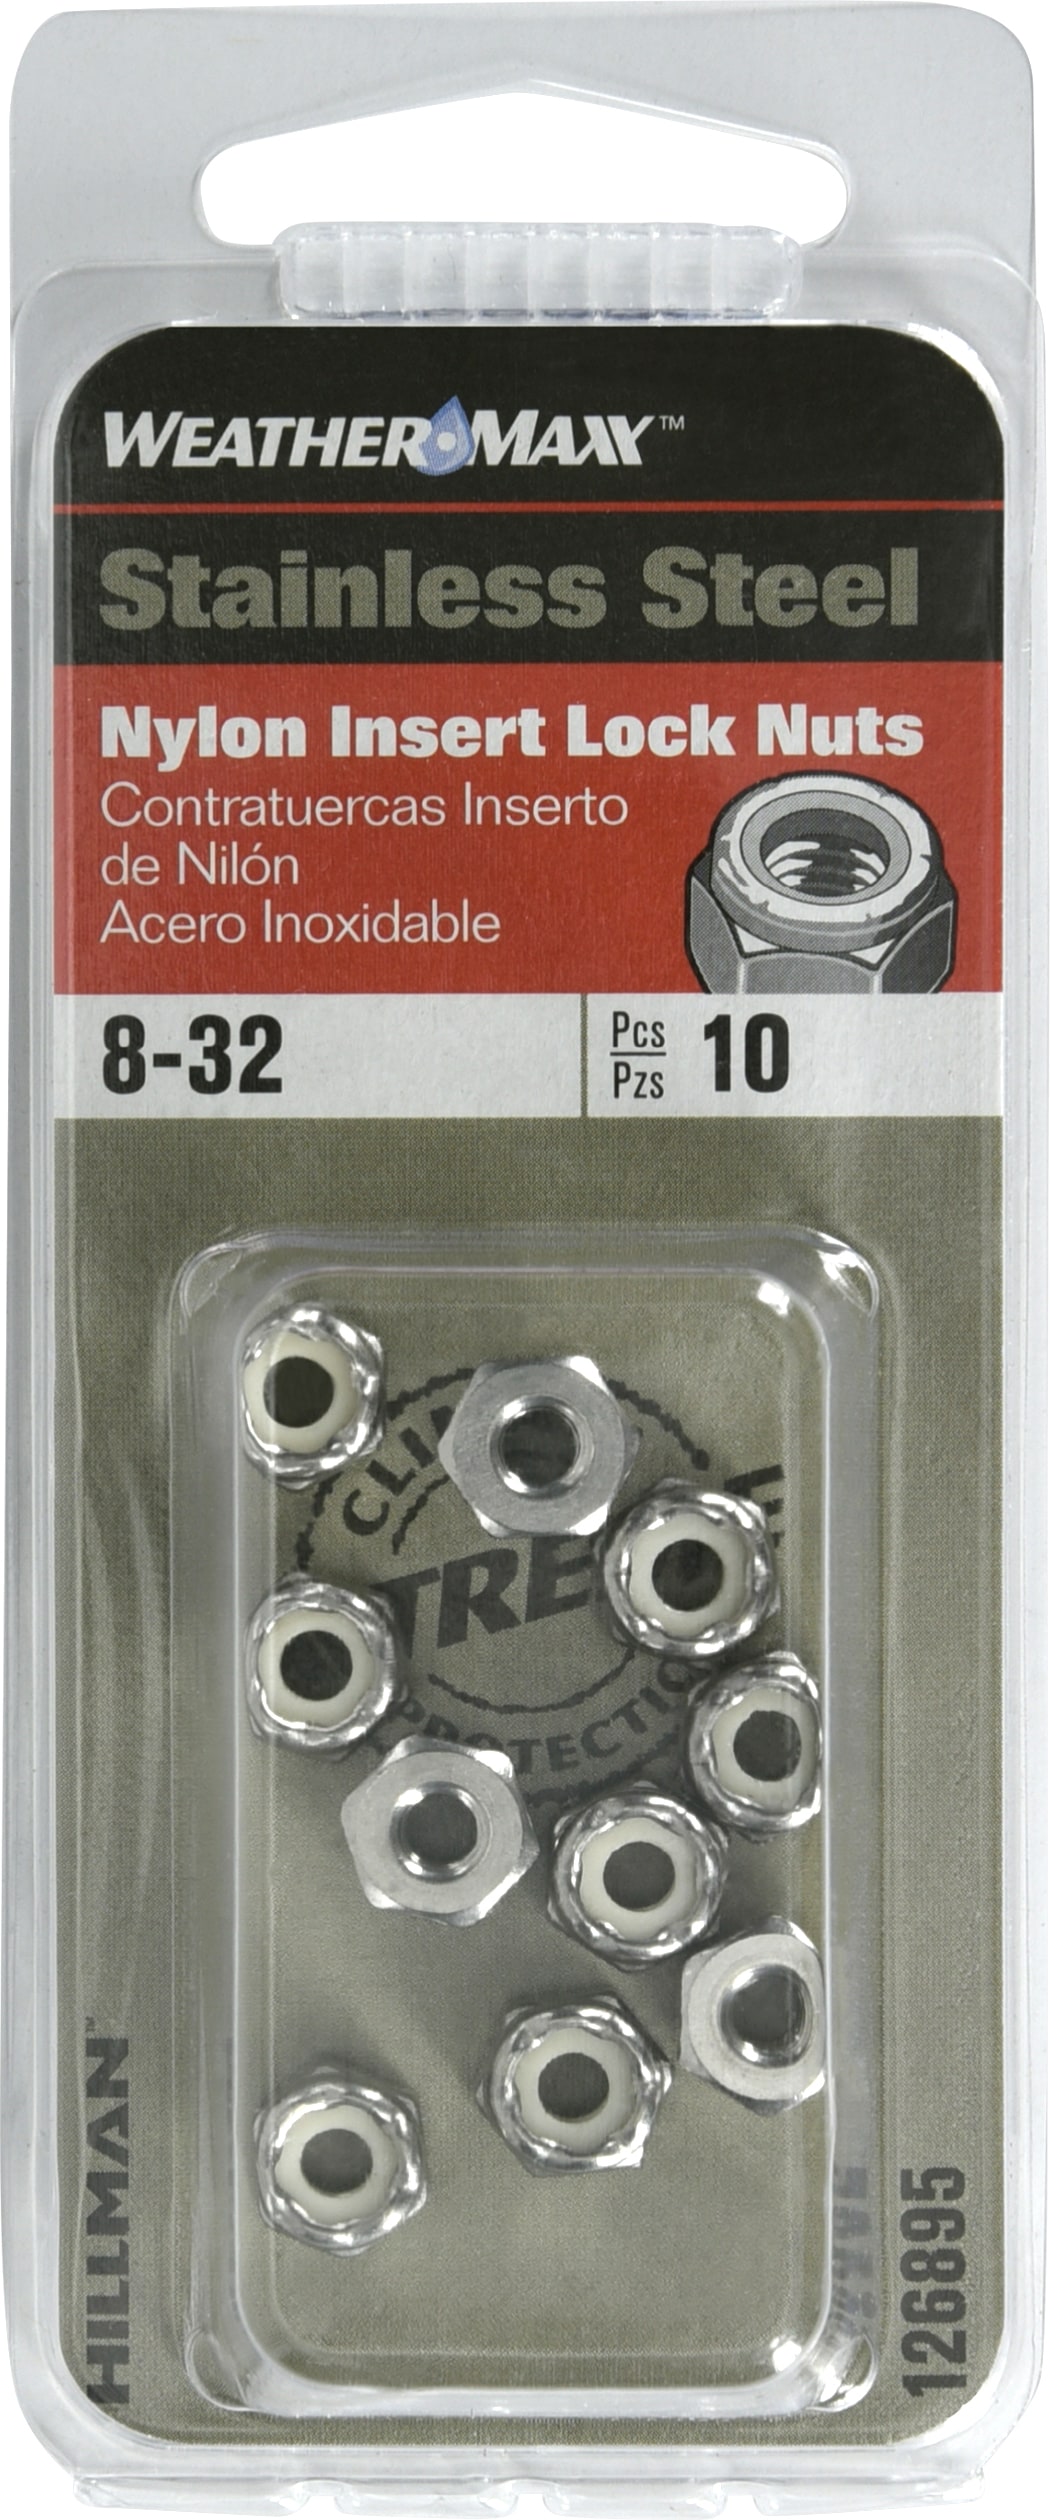 HEX NUT 8-32 PACK OF 25 STAINLESS STEEL 